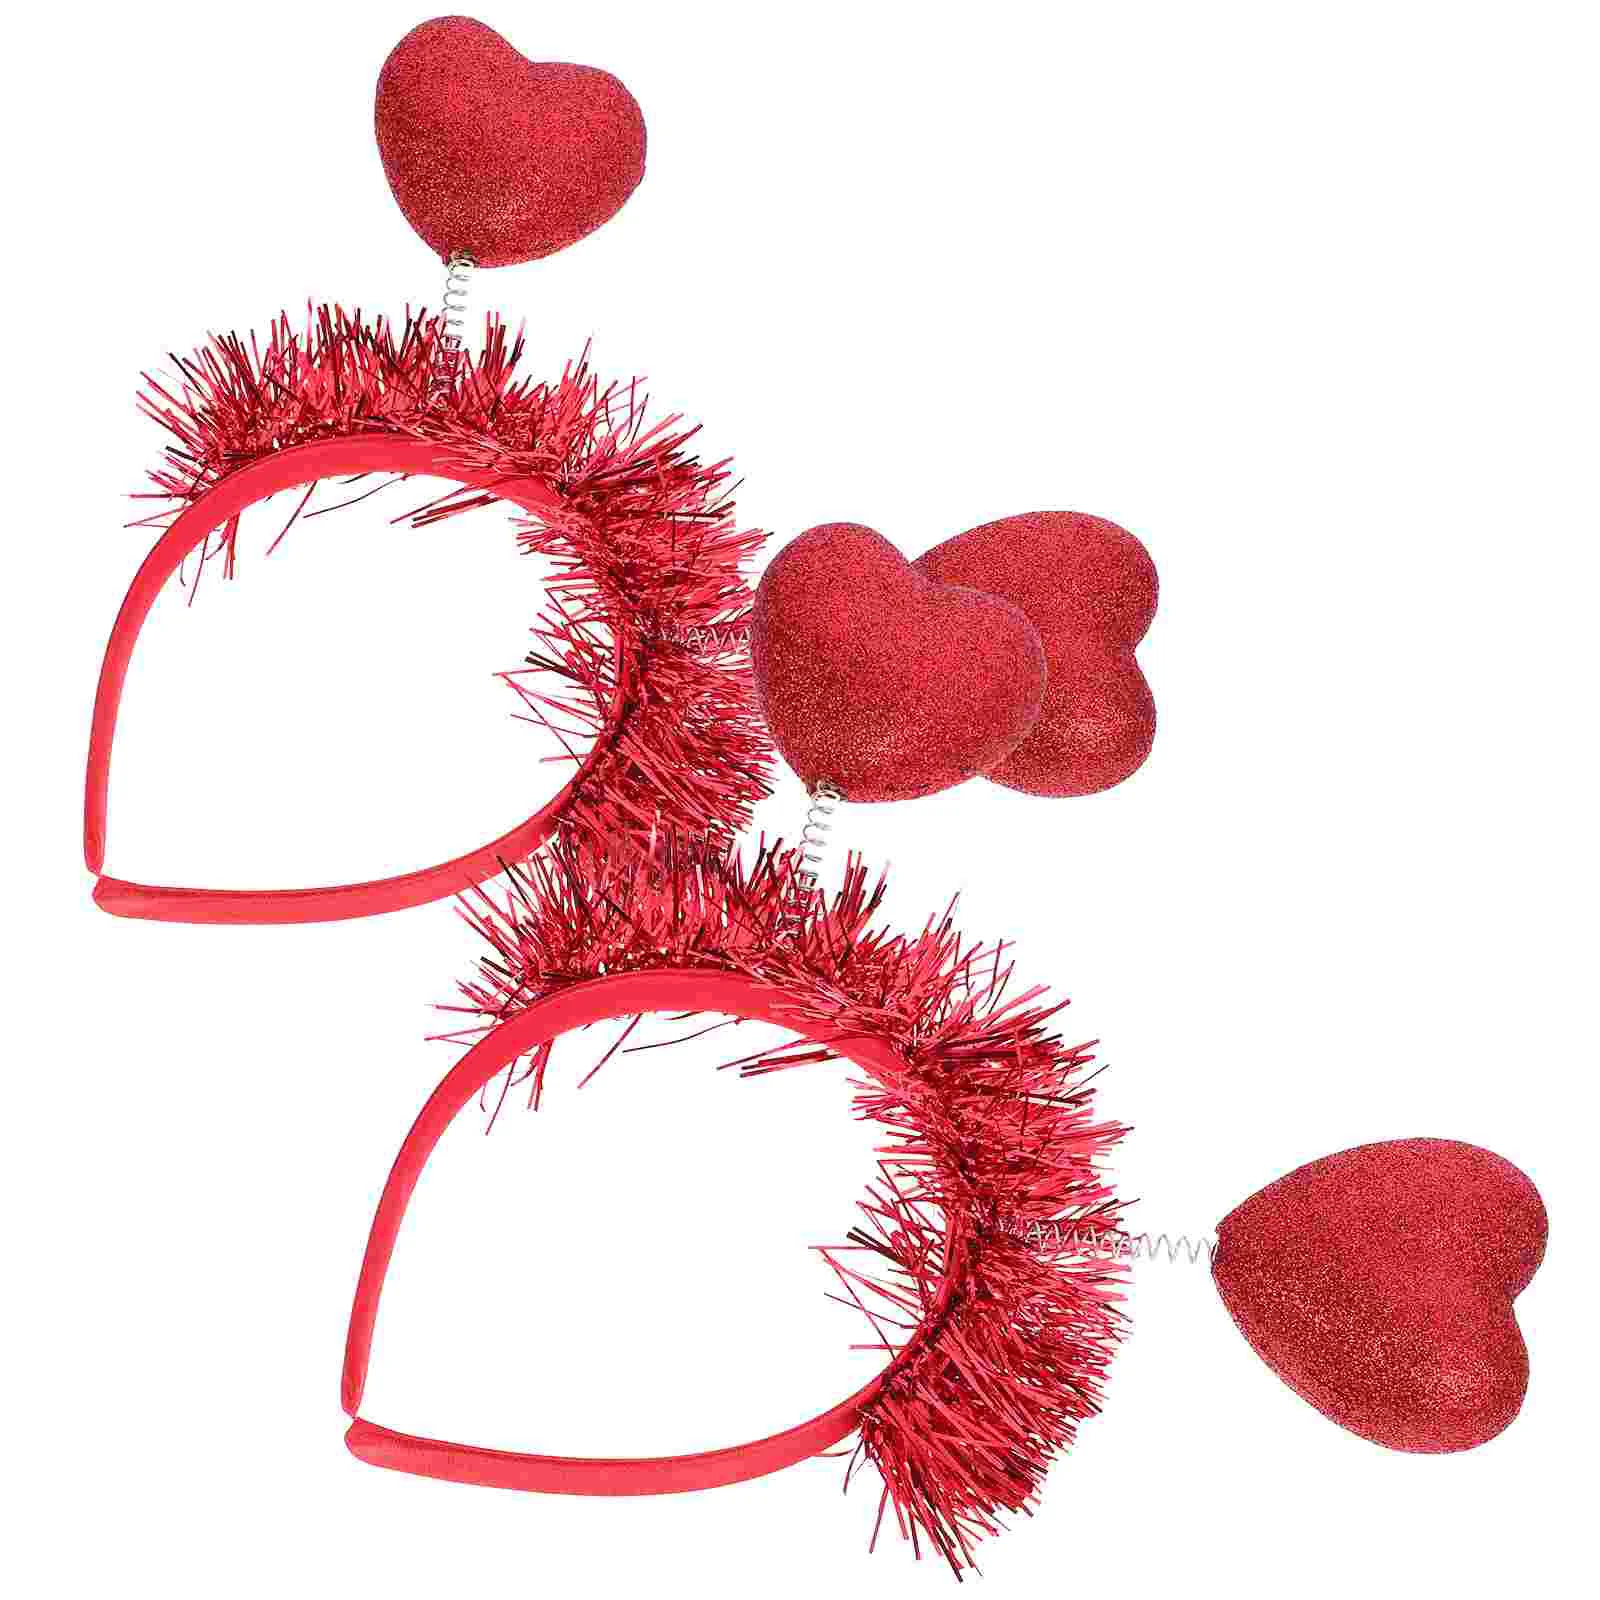 2 Pcs Love Headband Props Valentines Day Party Hairband Wedding Decorations Photography Headpiece Heart-shaped newborn baby photography props backdrop game boy knitting outfit headphone toys decorations fotografia studio shoots photo props